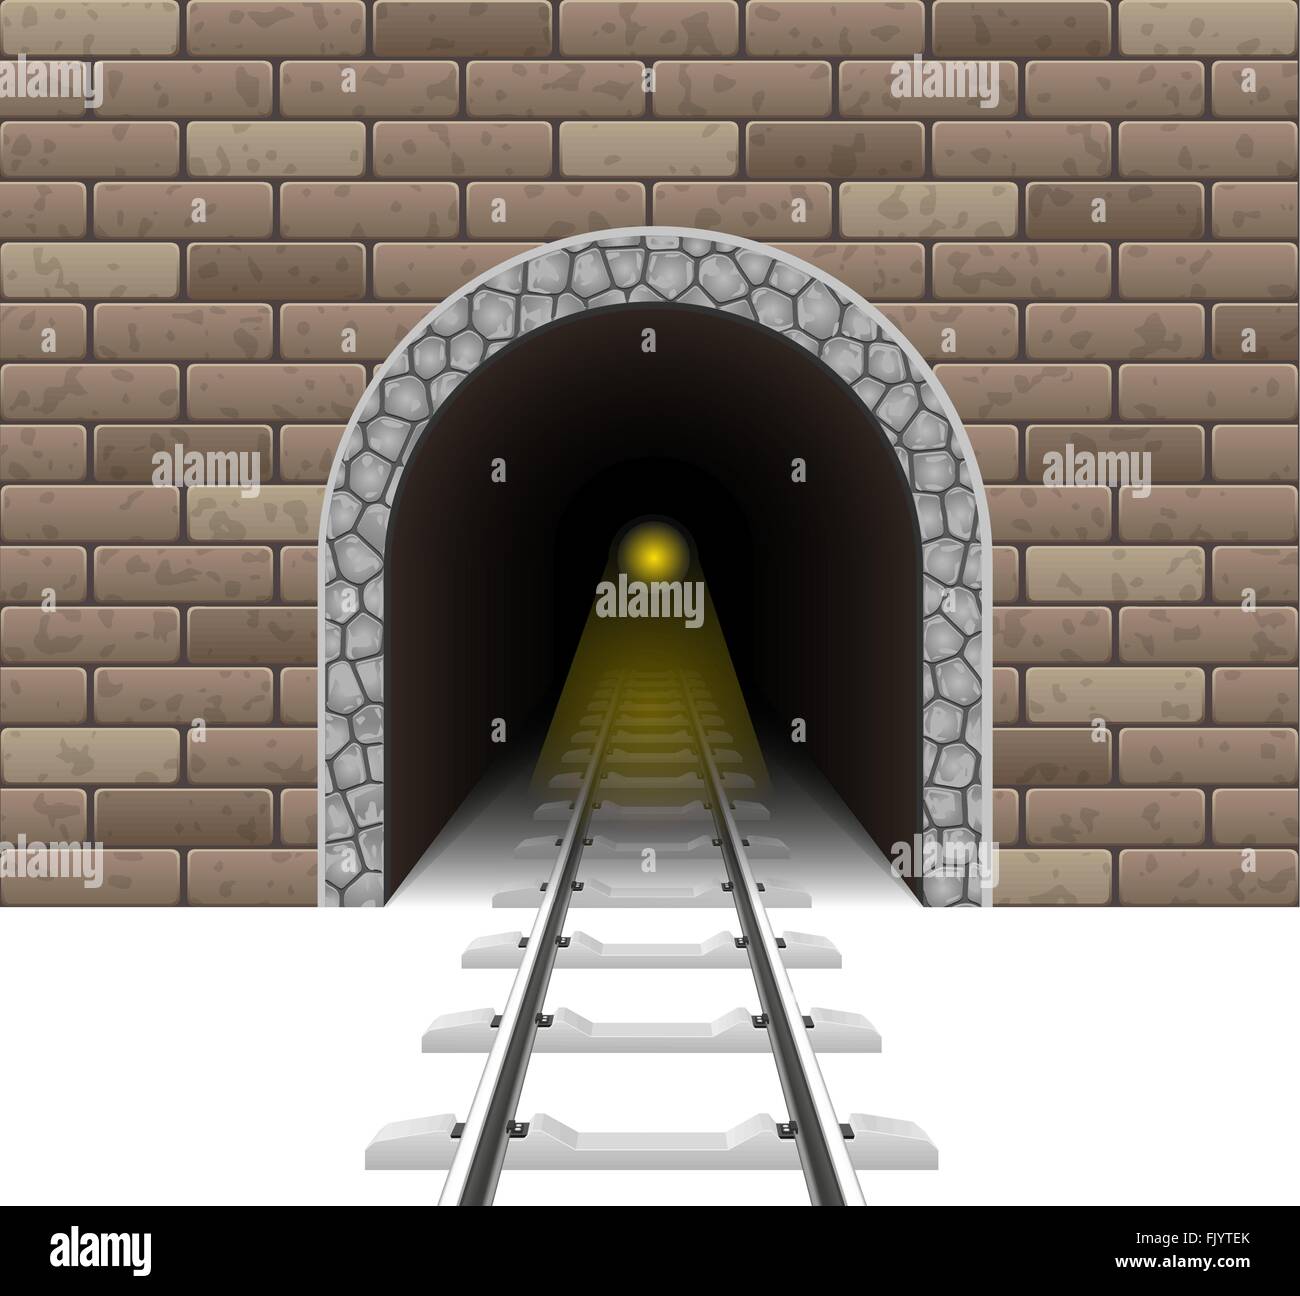 railway tunnel vector illustration isolated on white background Stock ...